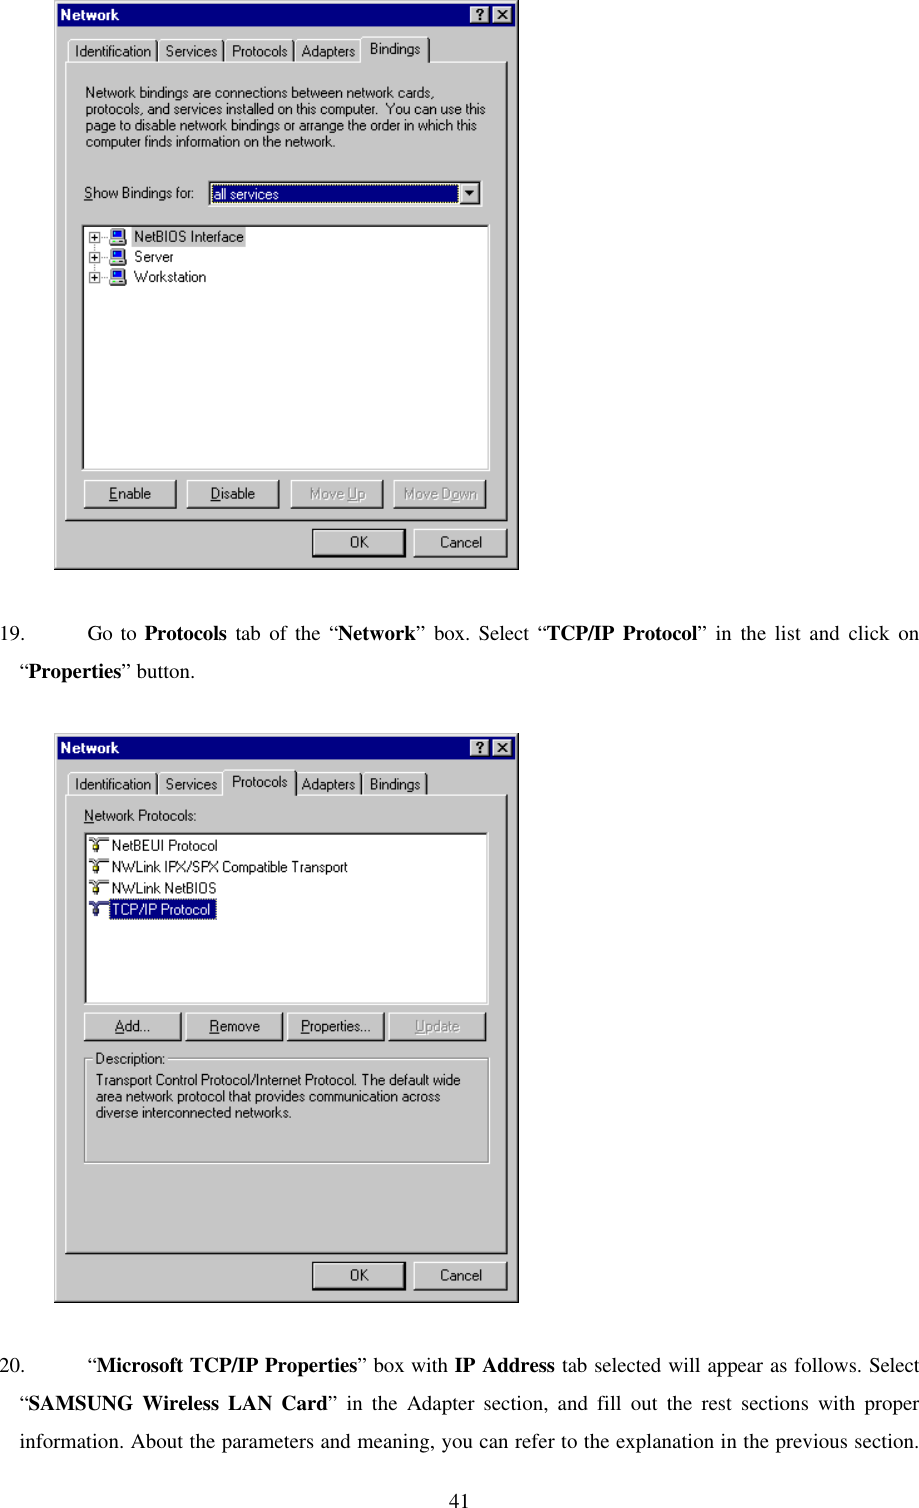 41          19. Go to Protocols tab of the “Network” box. Select “TCP/IP Protocol” in the list and click on“Properties” button.          20. “Microsoft TCP/IP Properties” box with IP Address tab selected will appear as follows. Select“SAMSUNG Wireless LAN Card” in the Adapter section, and fill out the rest sections with properinformation. About the parameters and meaning, you can refer to the explanation in the previous section.